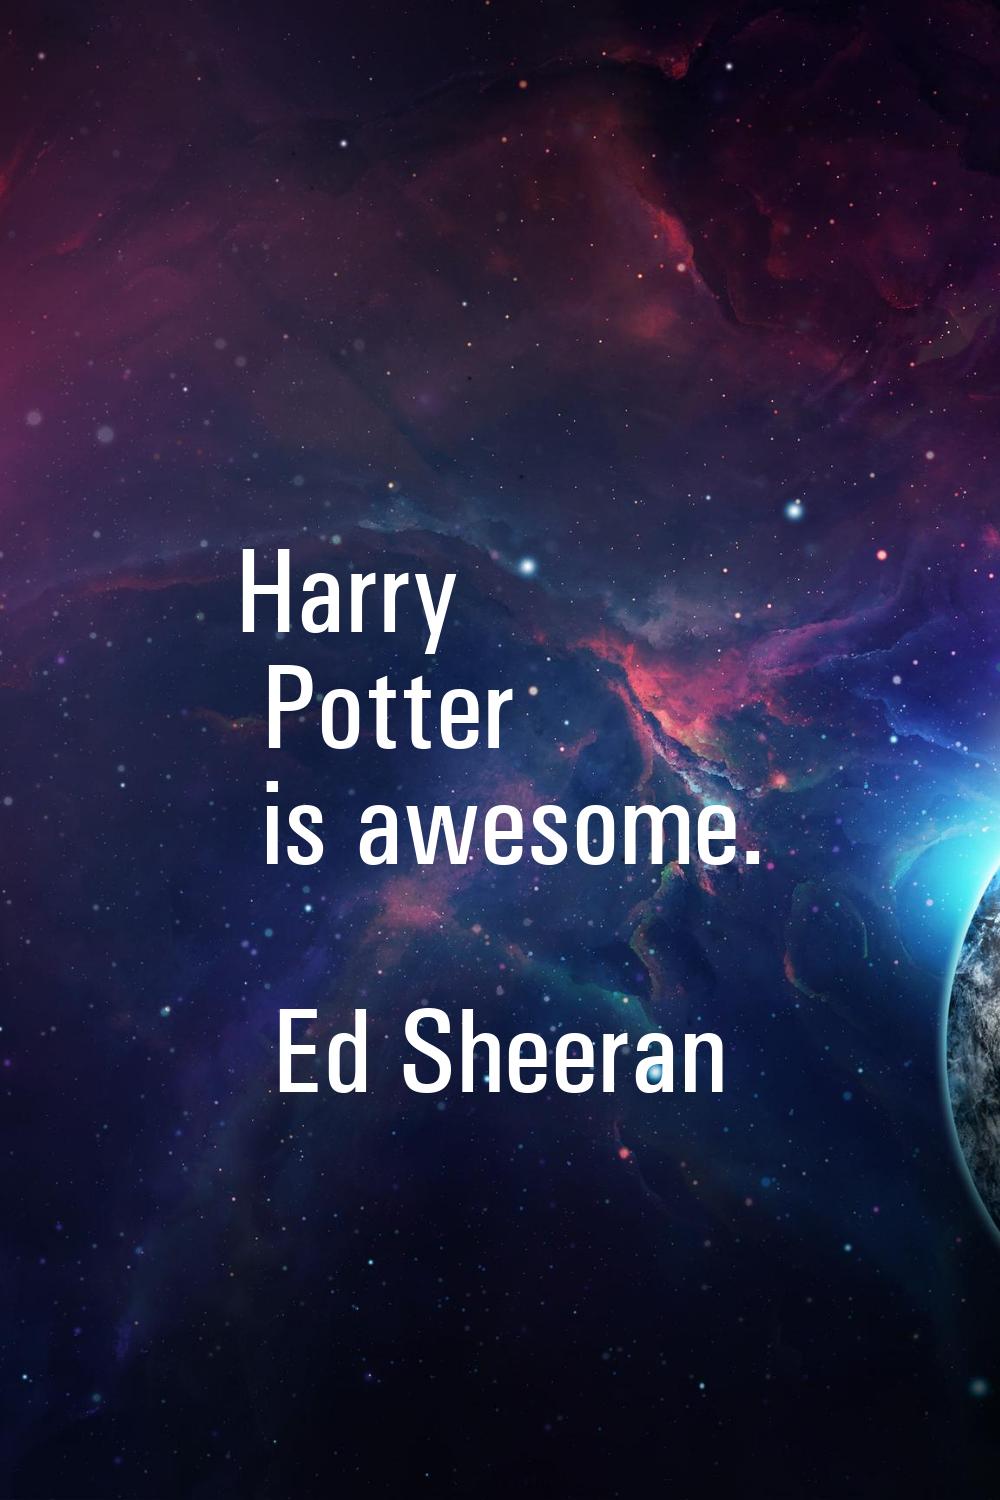 Harry Potter is awesome.